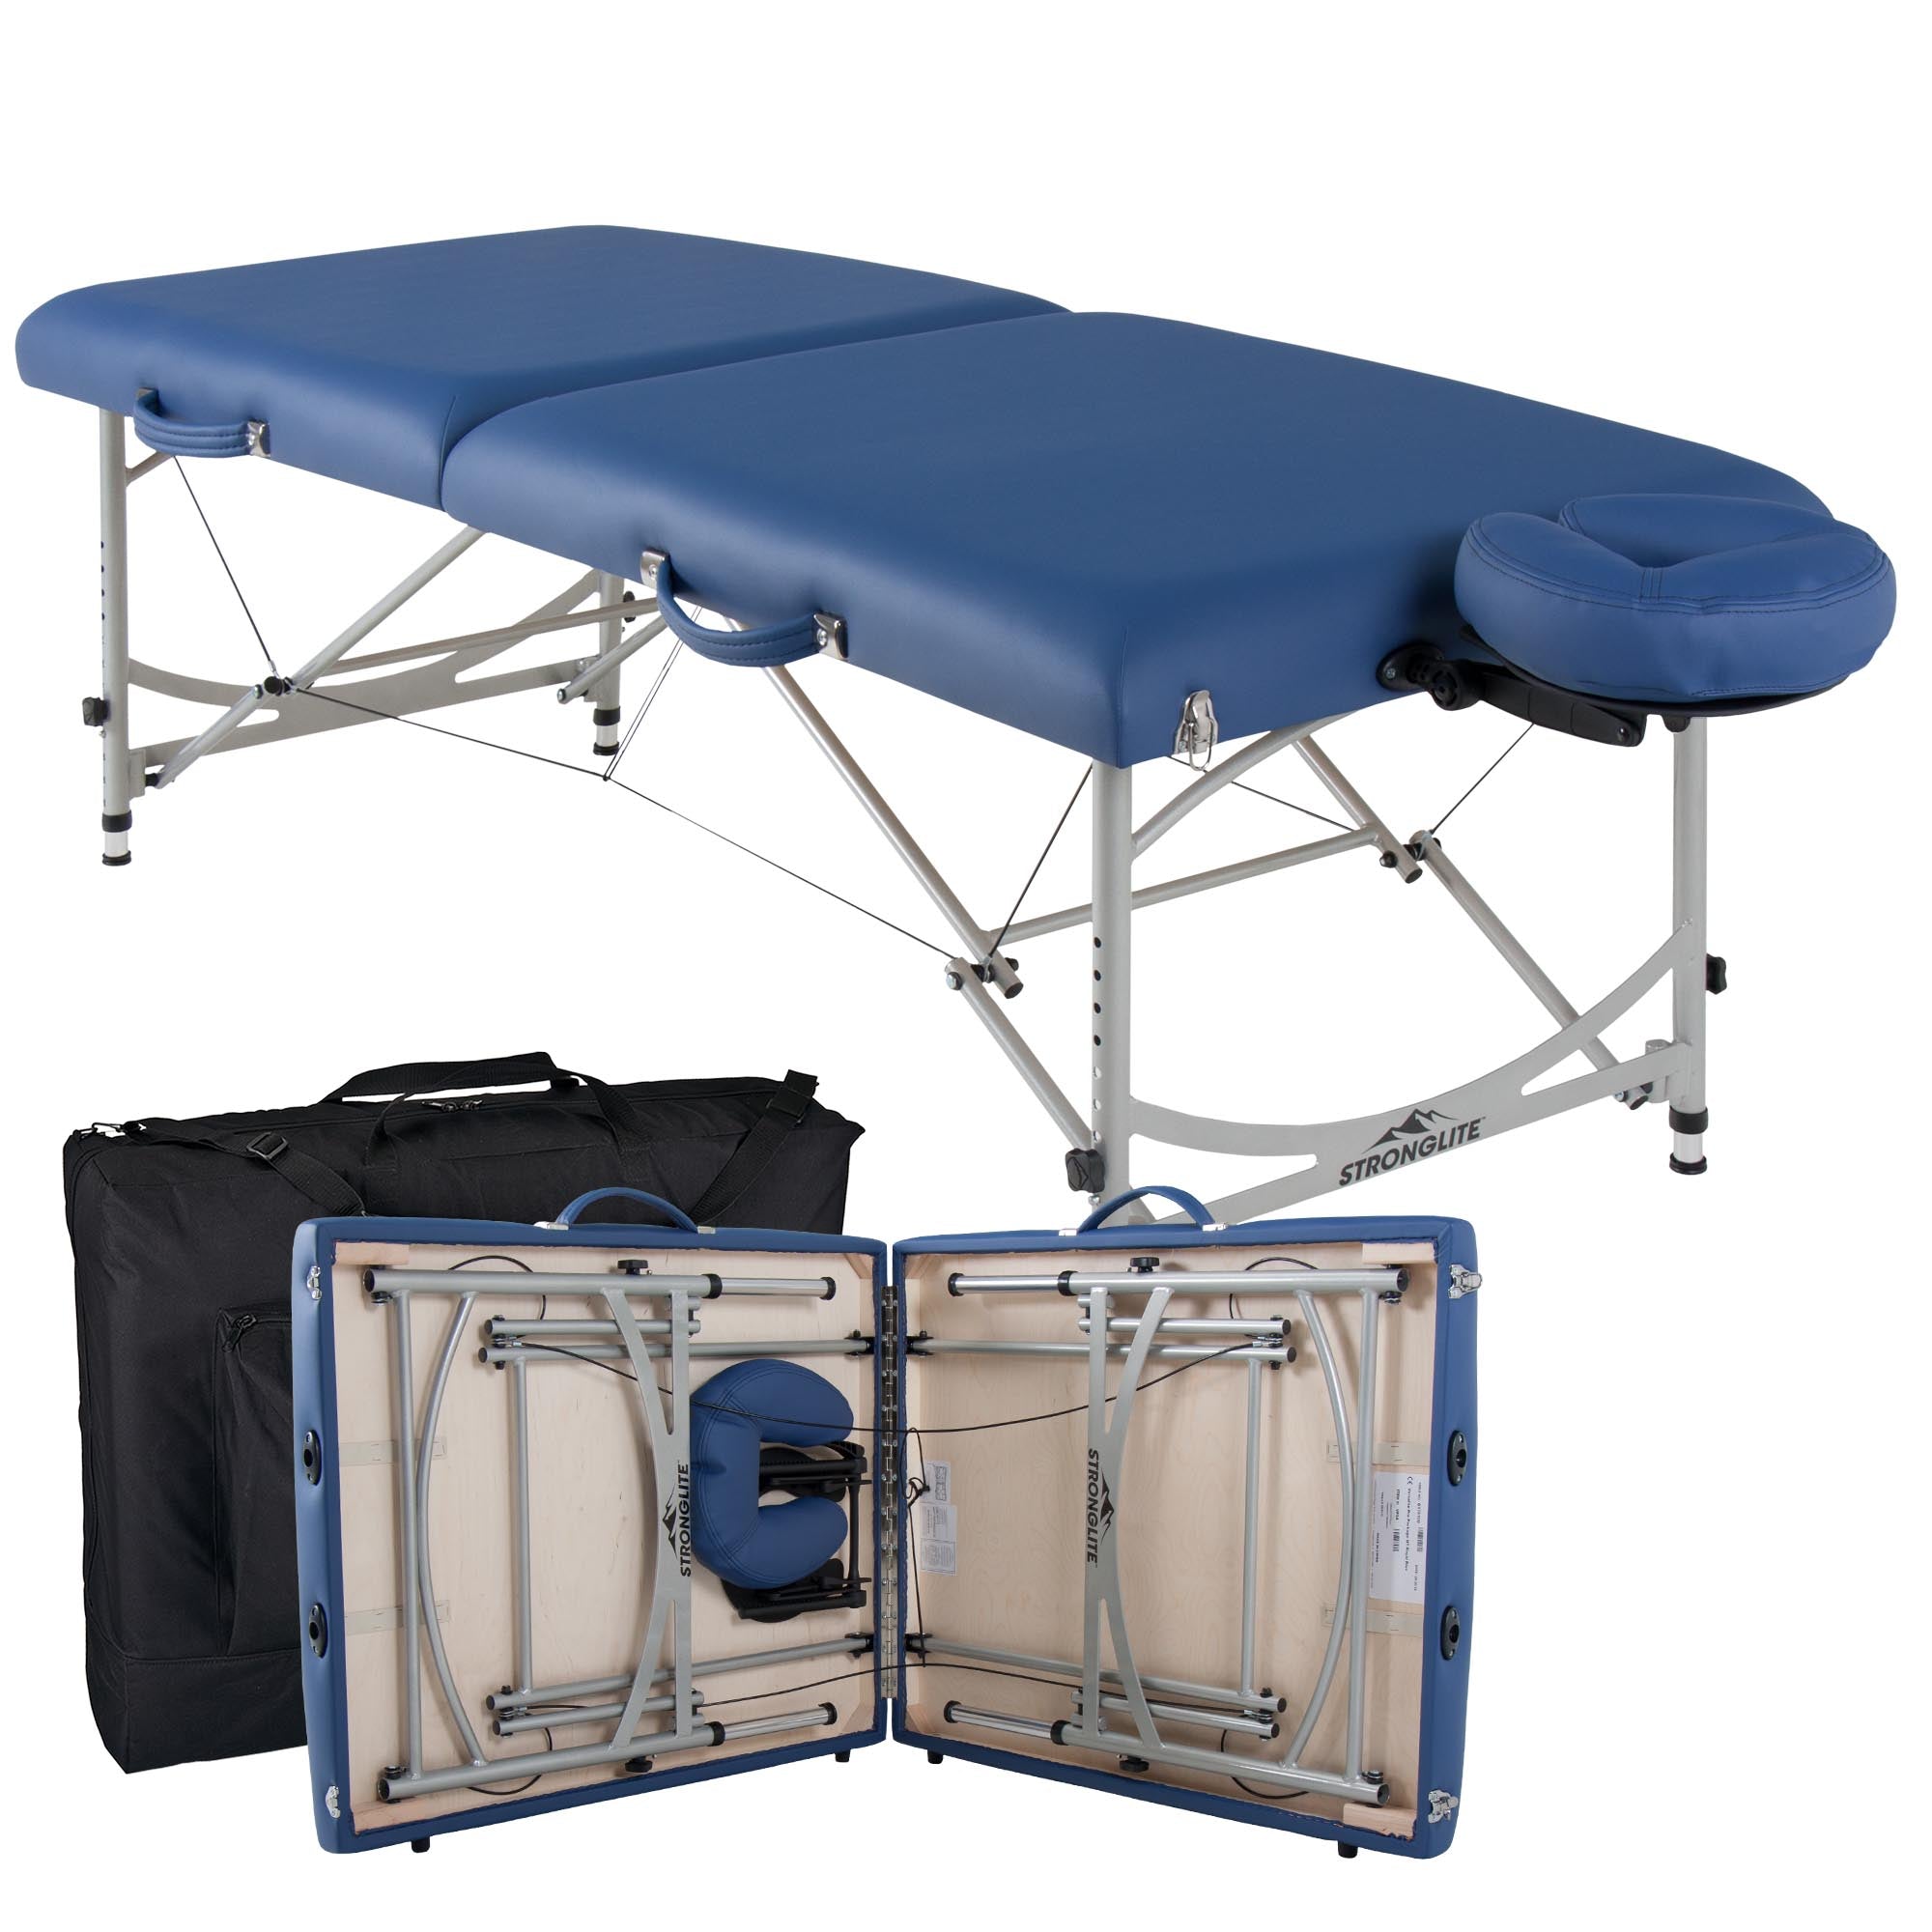 StrongLite Versalite Portable Massage Table Package